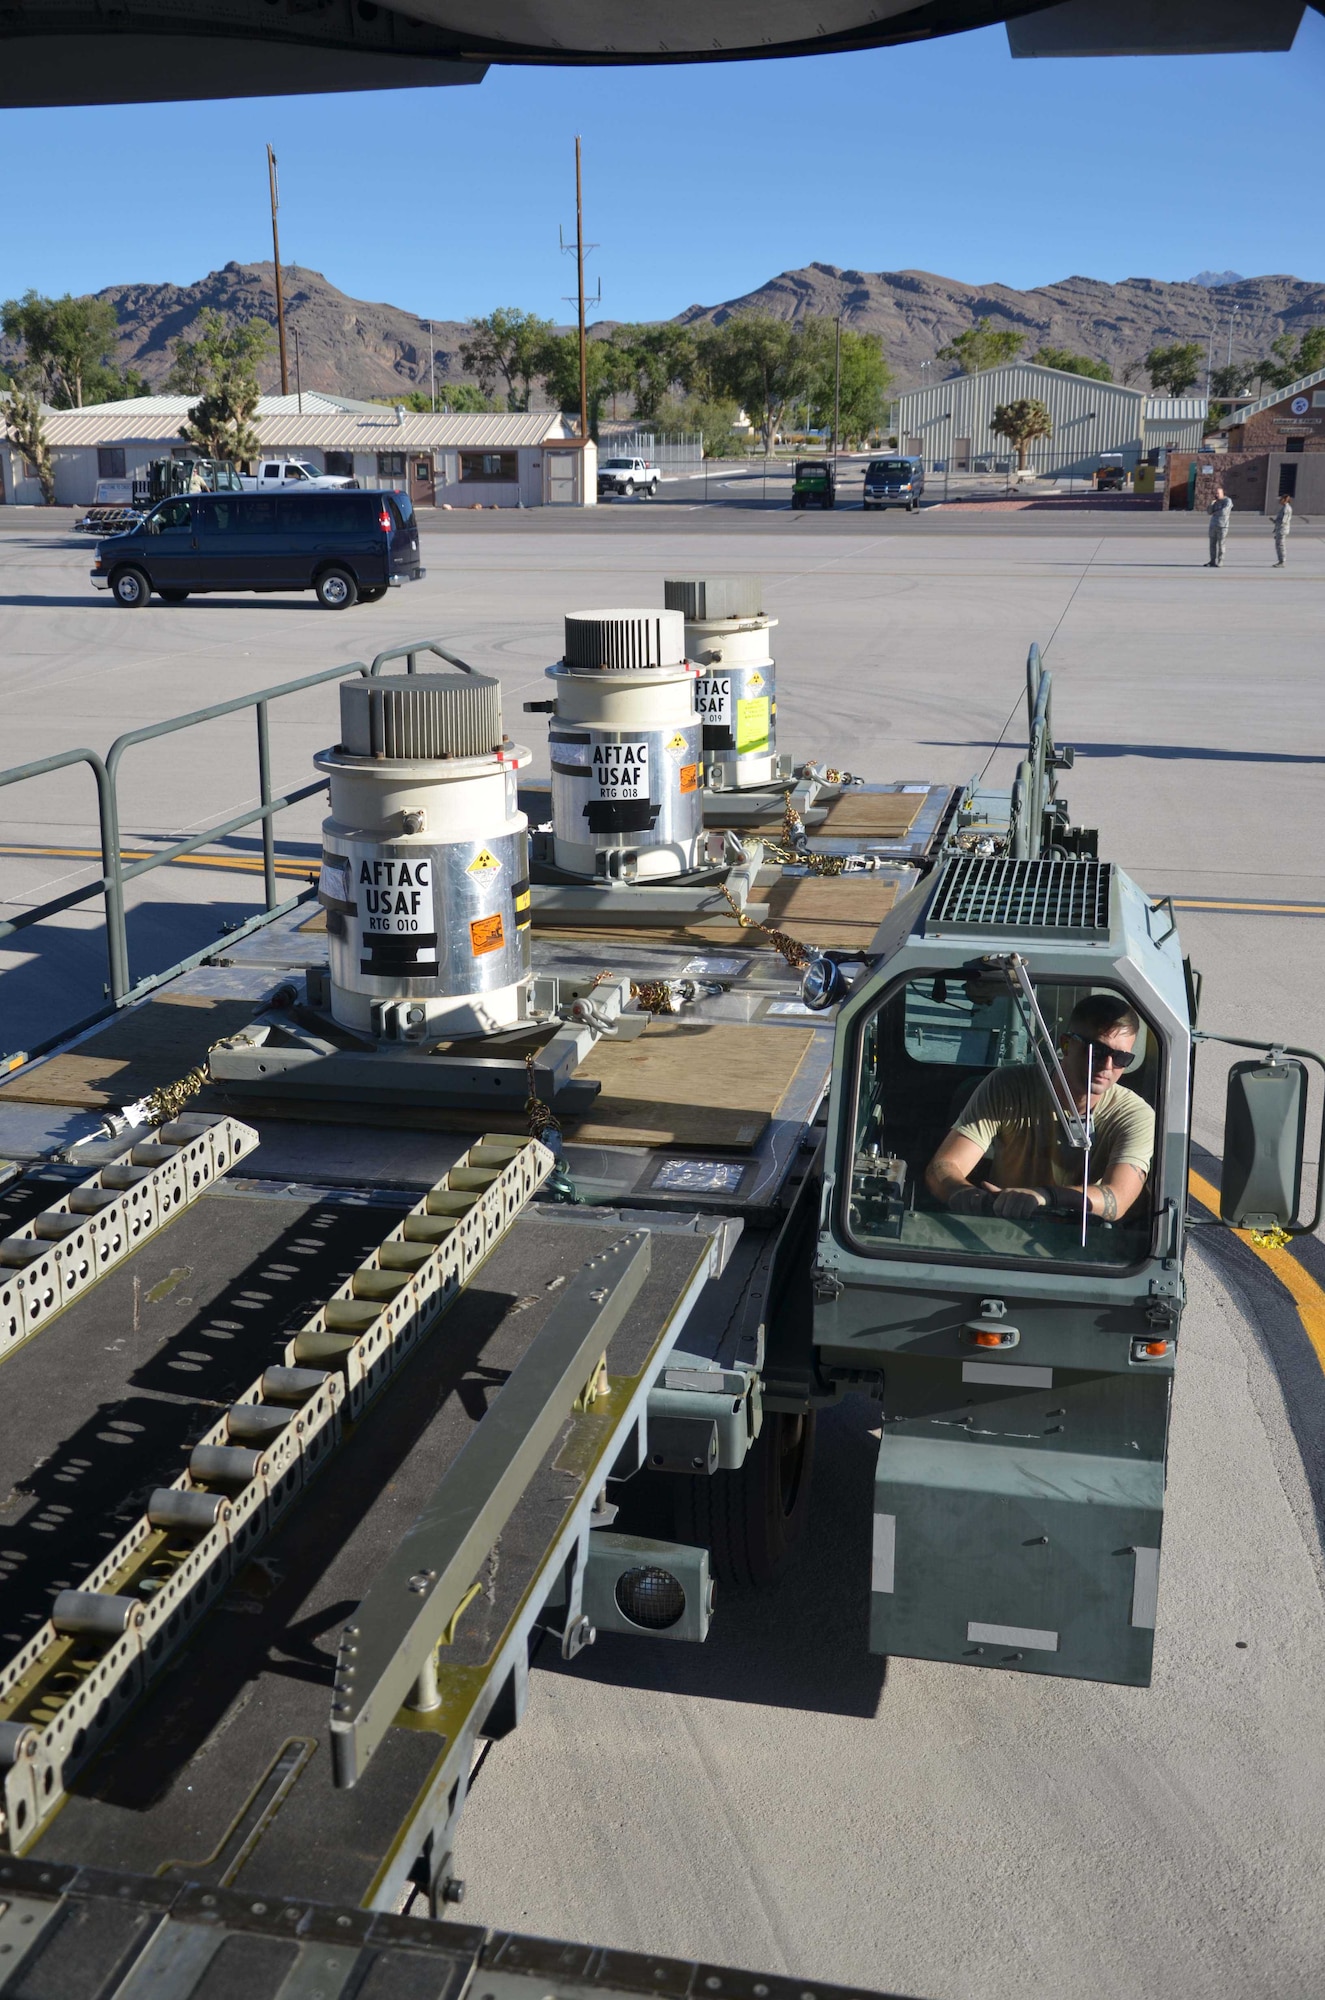 Three radioisotope thermoelectric generators belonging to the Air Force Technical Applications Center, Patrick AFB, Fla., are downloaded from an Air Force C-17 Globemaster III onto a 25K loader at Creech AFB, Nevada, July 24, 2015 in preparation for transport to the Nevada National Security Site.  The RTGs, which contain nuclear material, were transported from Burnt Mountain, Alaska after being decommissioned as a power source.  By regulation, radioactive material determined to be excess must be moved to a facility with a mission, capability and authorization to support long-term storage or recycling of the material. (U.S. Air Force photo by Susan A. Romano)